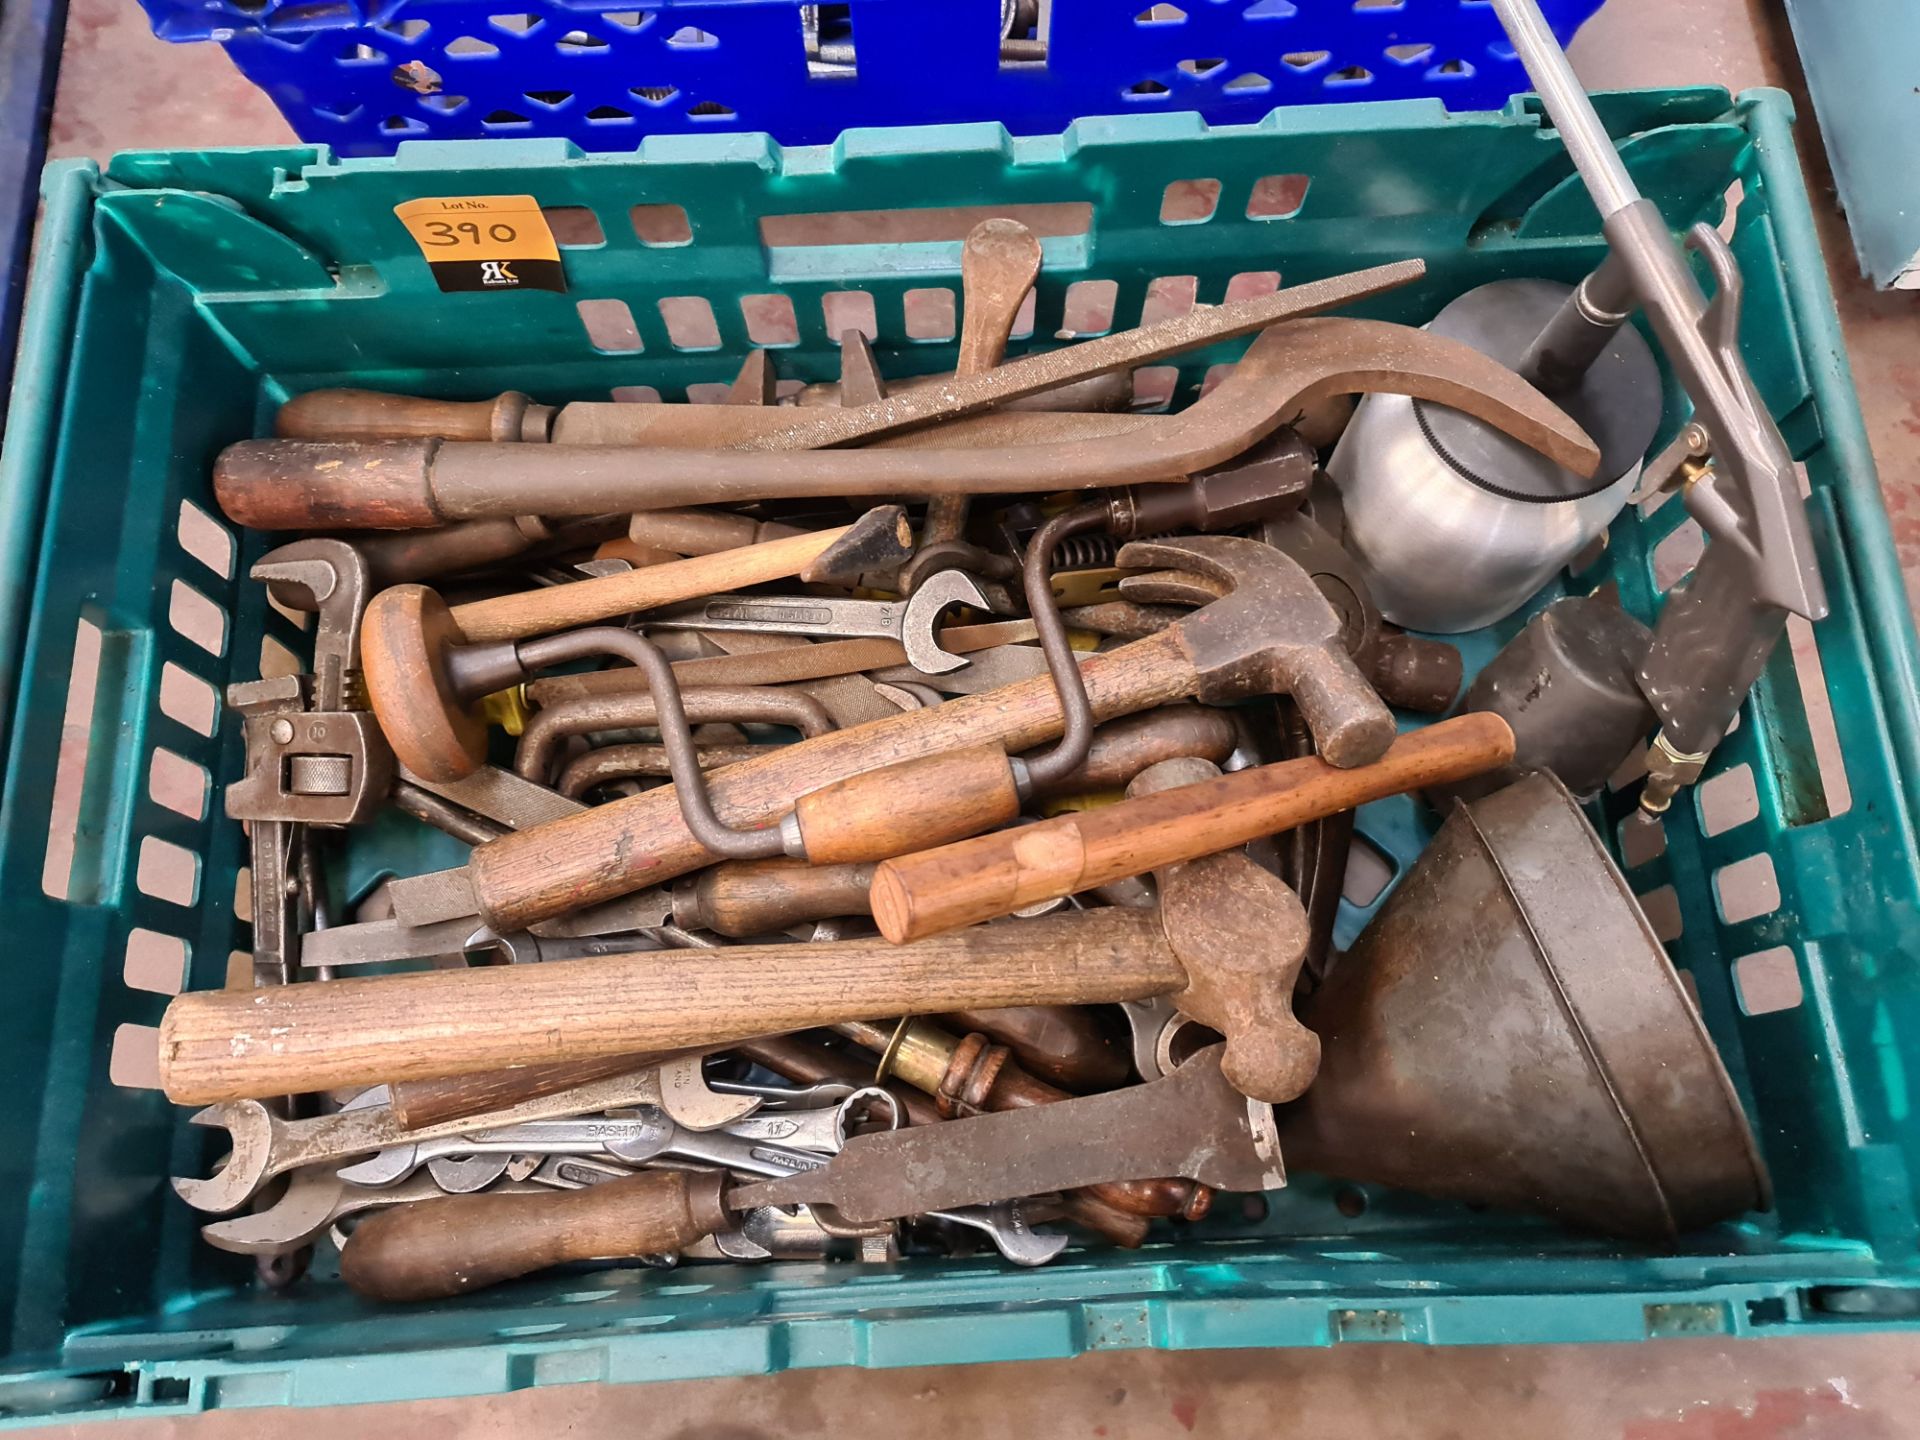 Contents of a crate of hand tools - crate excluded